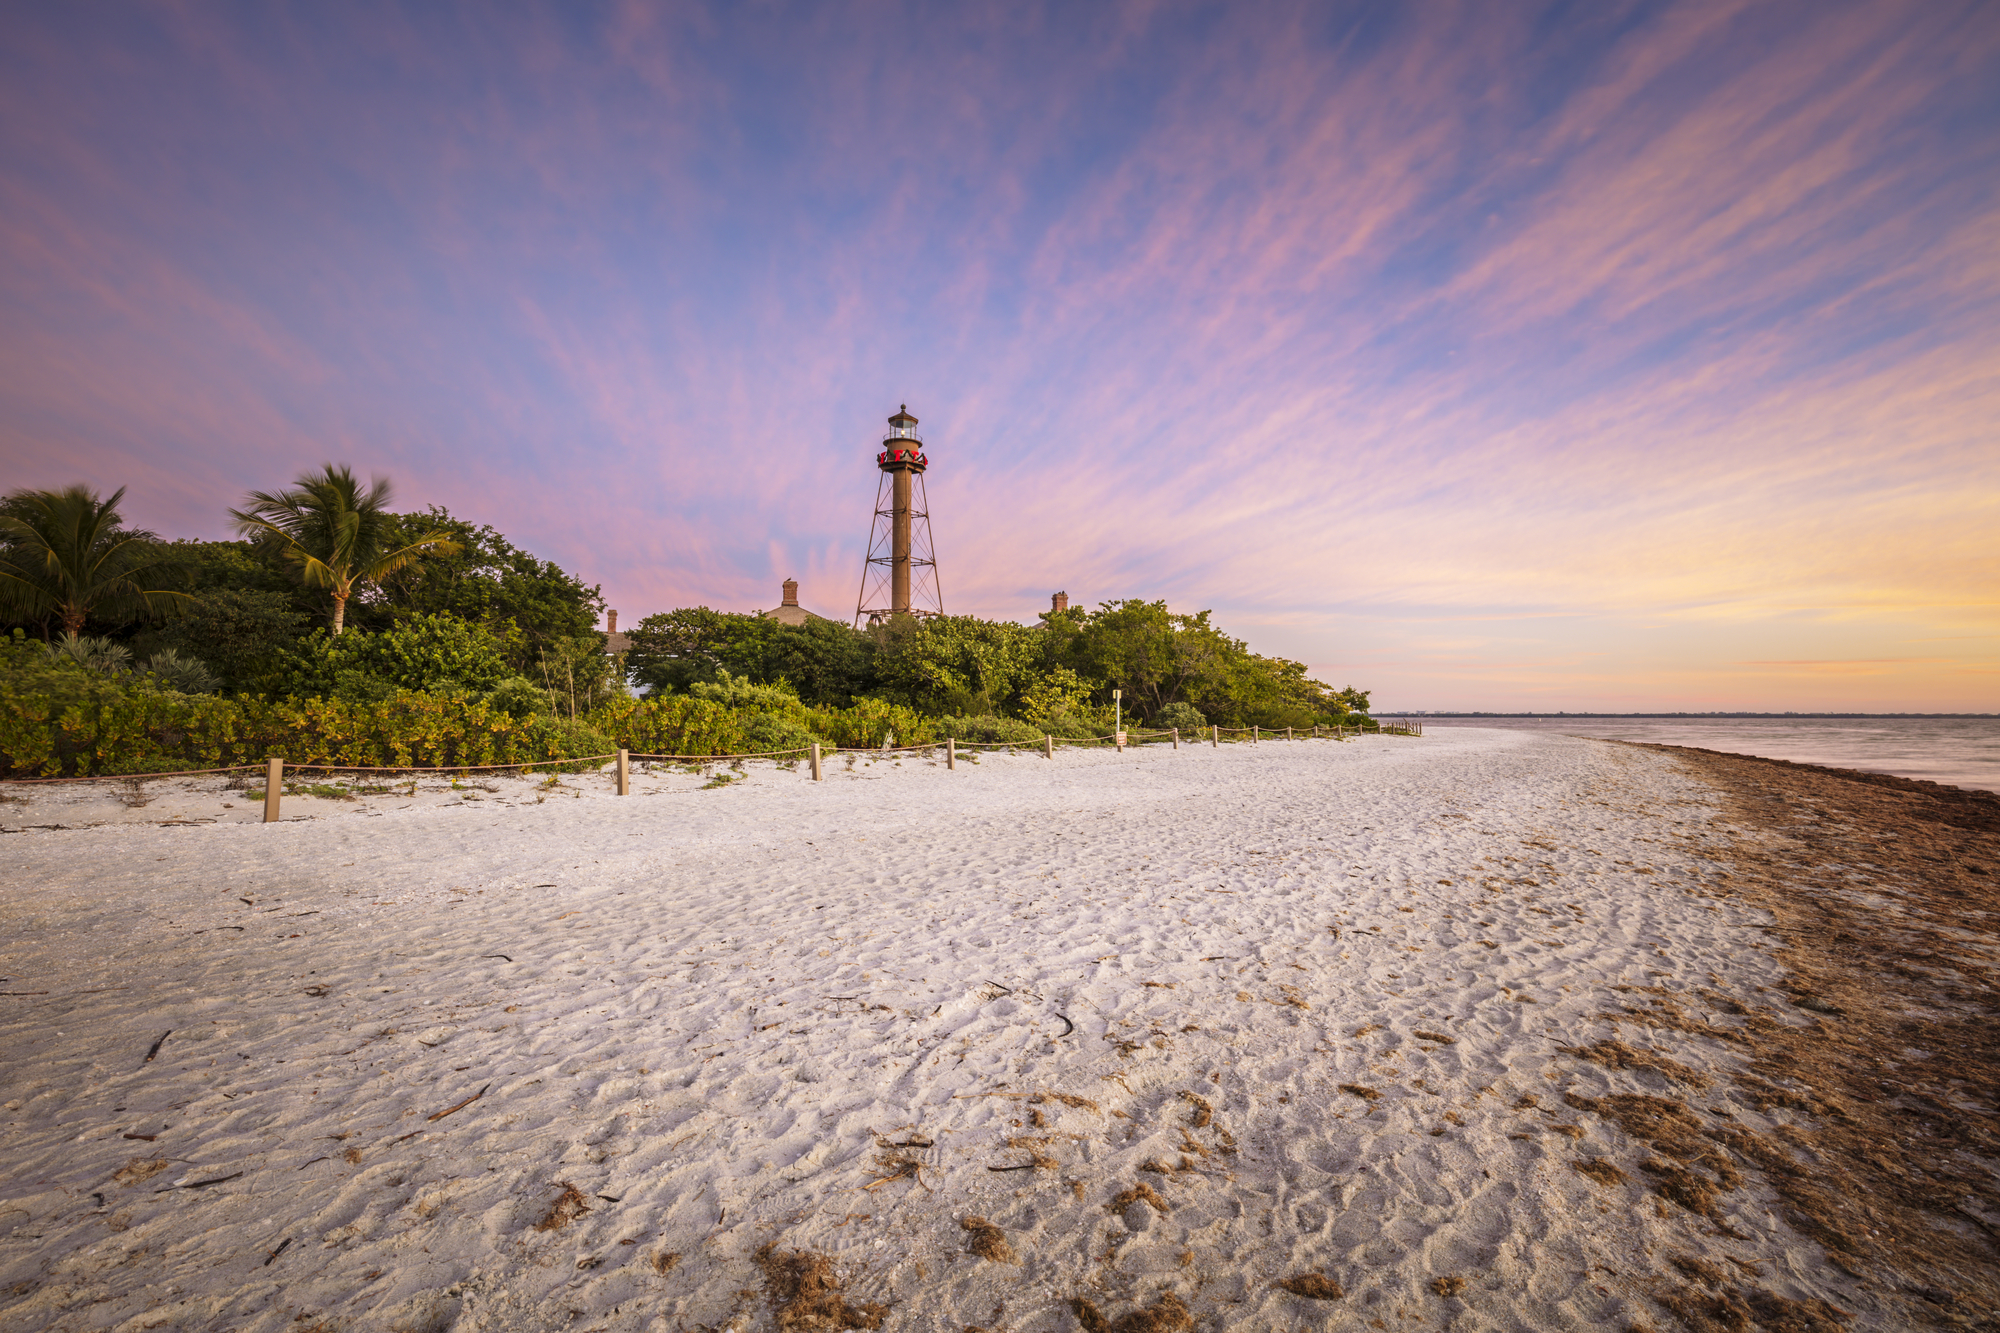 Sanibel island lighthouse at sunset with white sands and tropical greenery. 